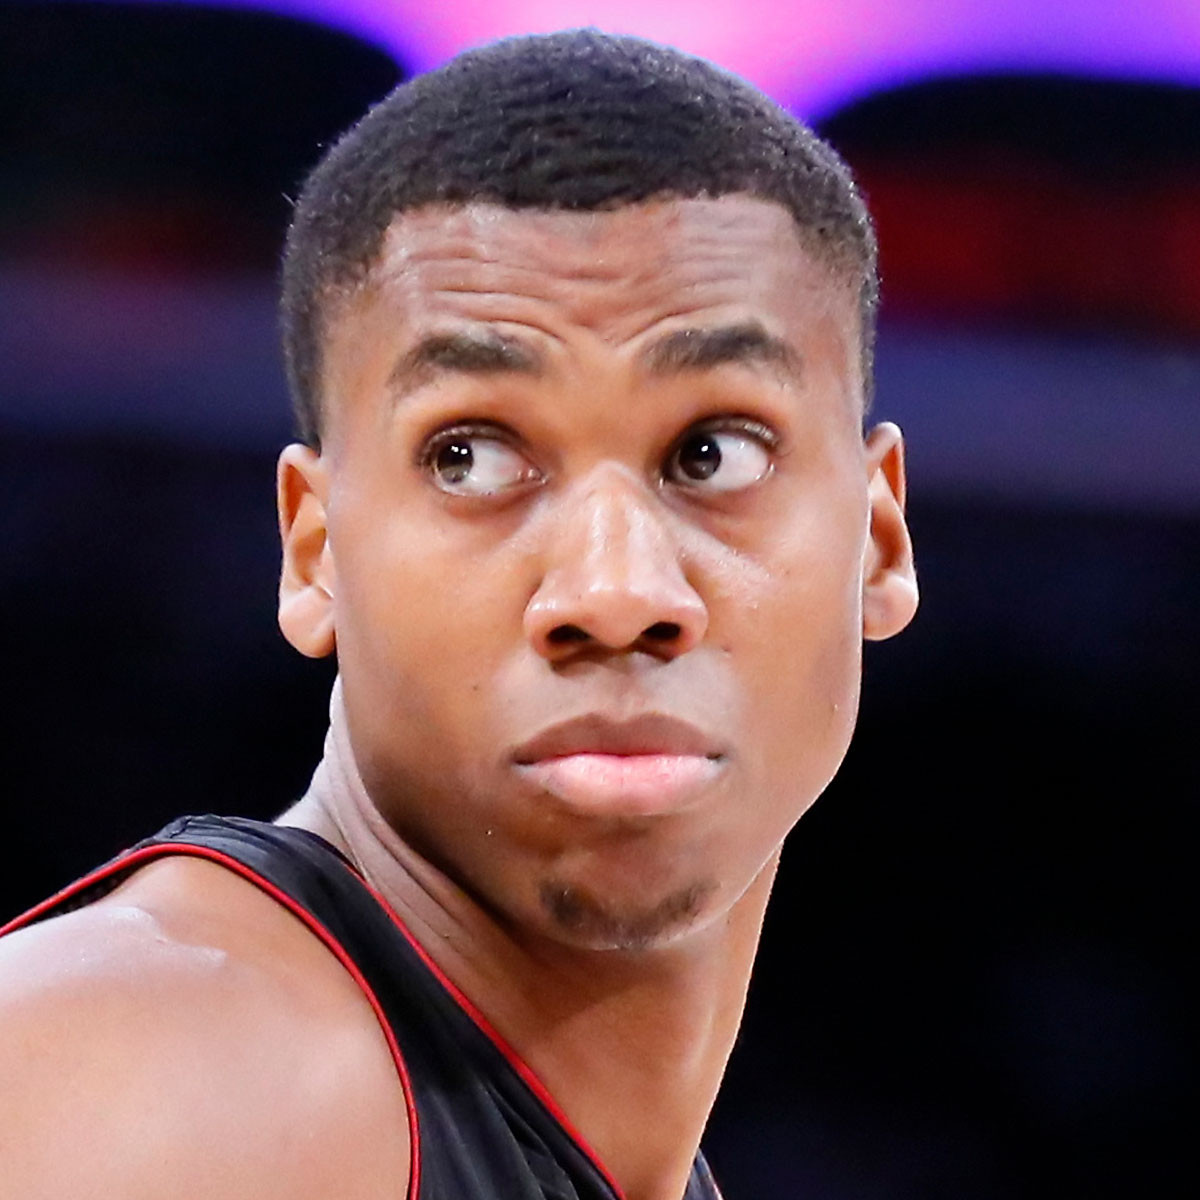 Hassan Whiteside With A Monster Performance! 29 Pts 20 Rebs 9 Blks!